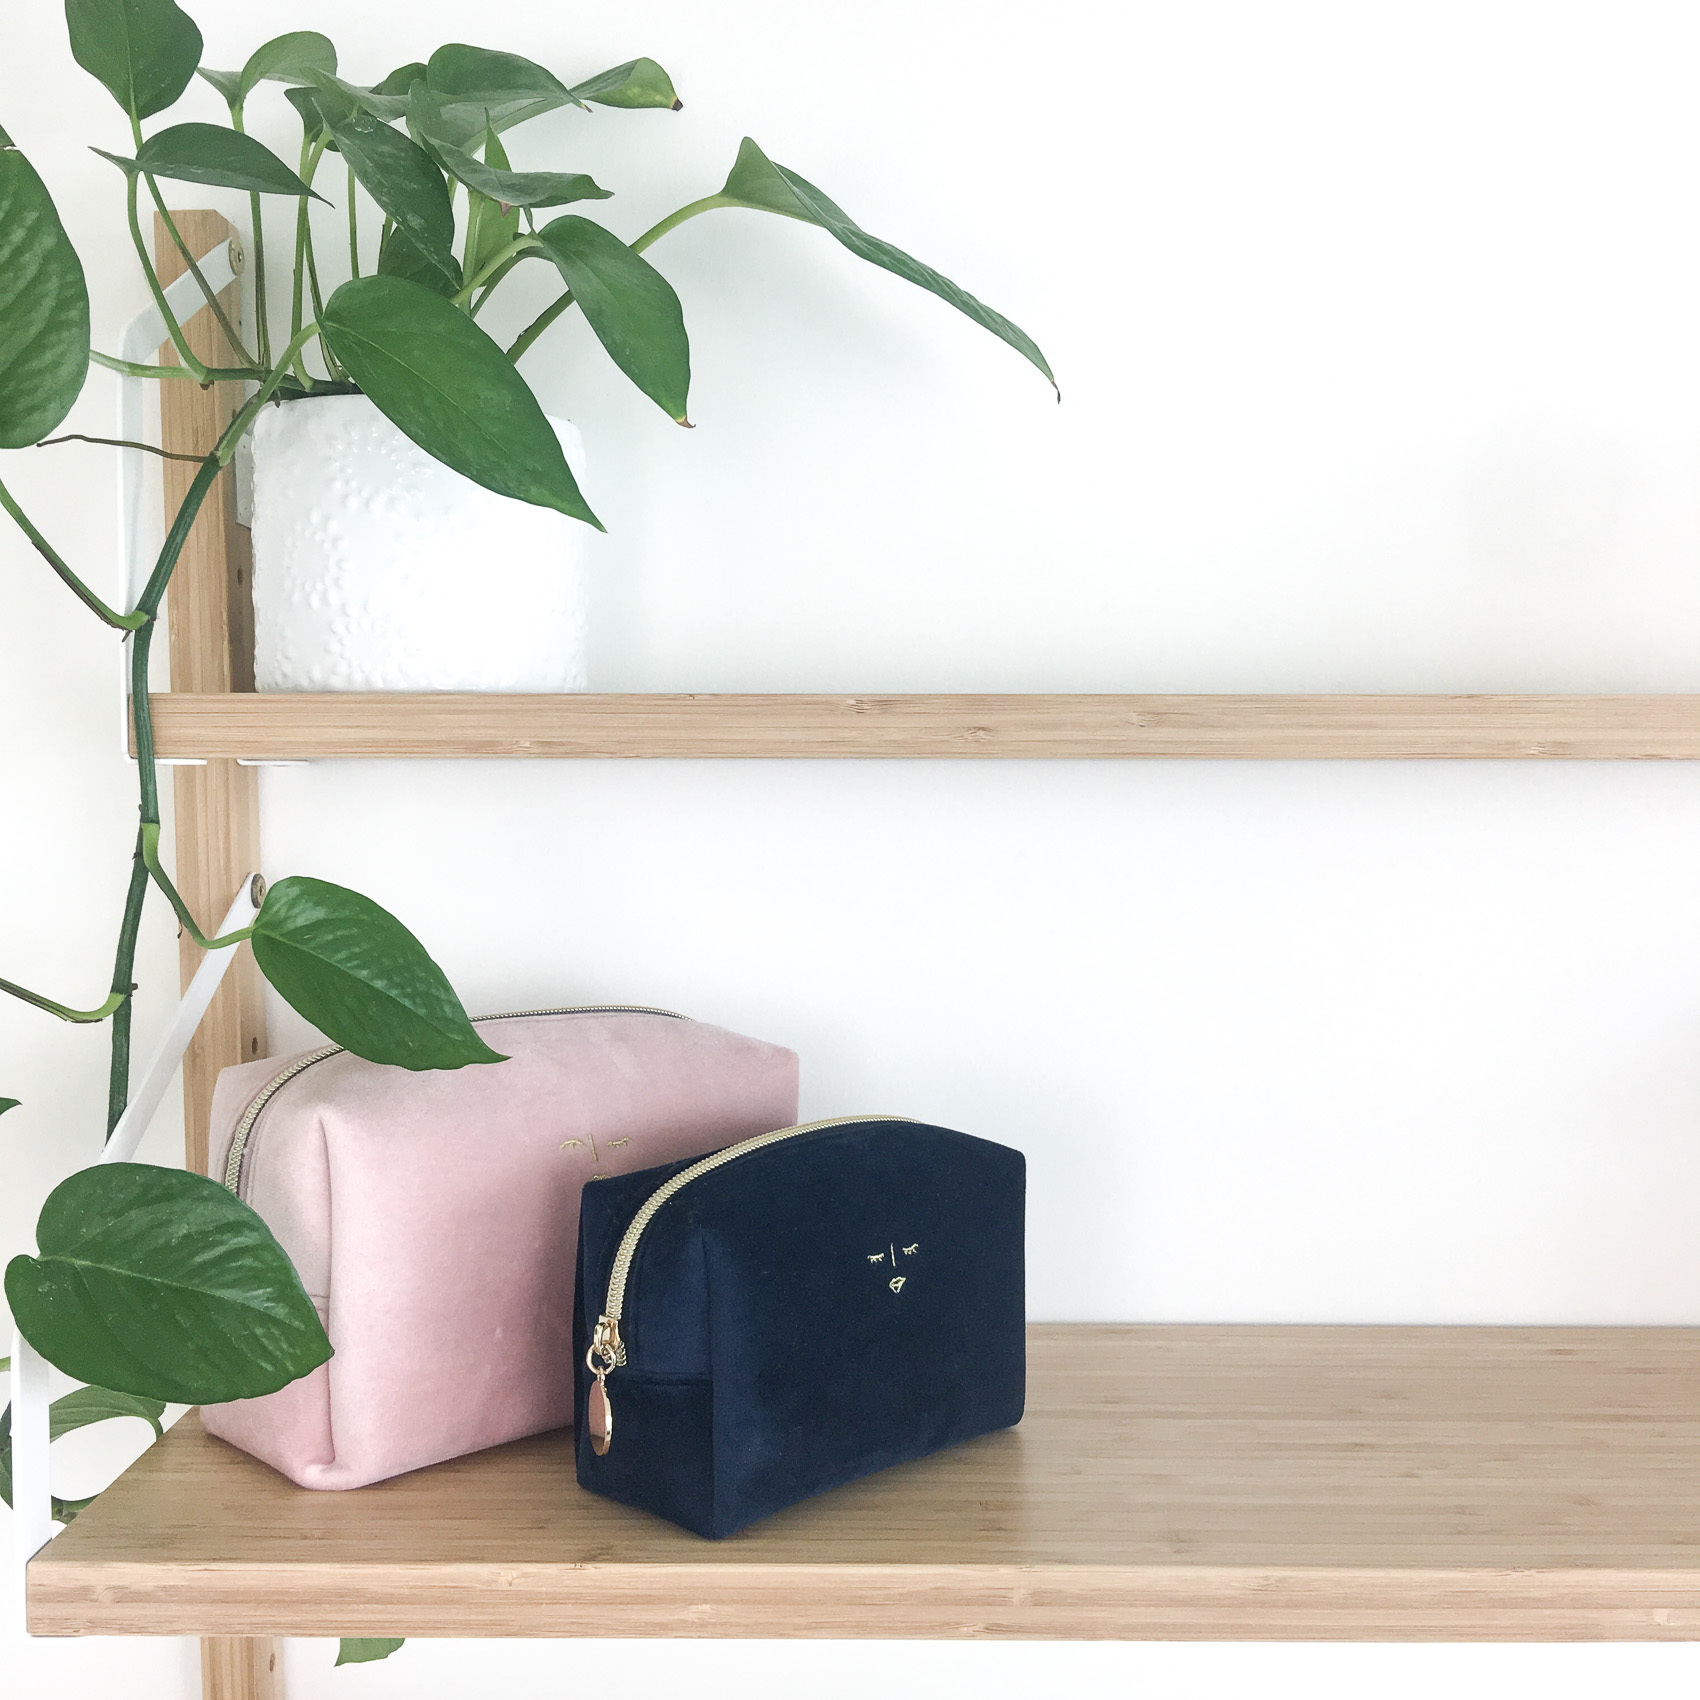 SVALNAS-Wall-mounted workspace combination bamboo Oliver Bonas cosmetic bags plant